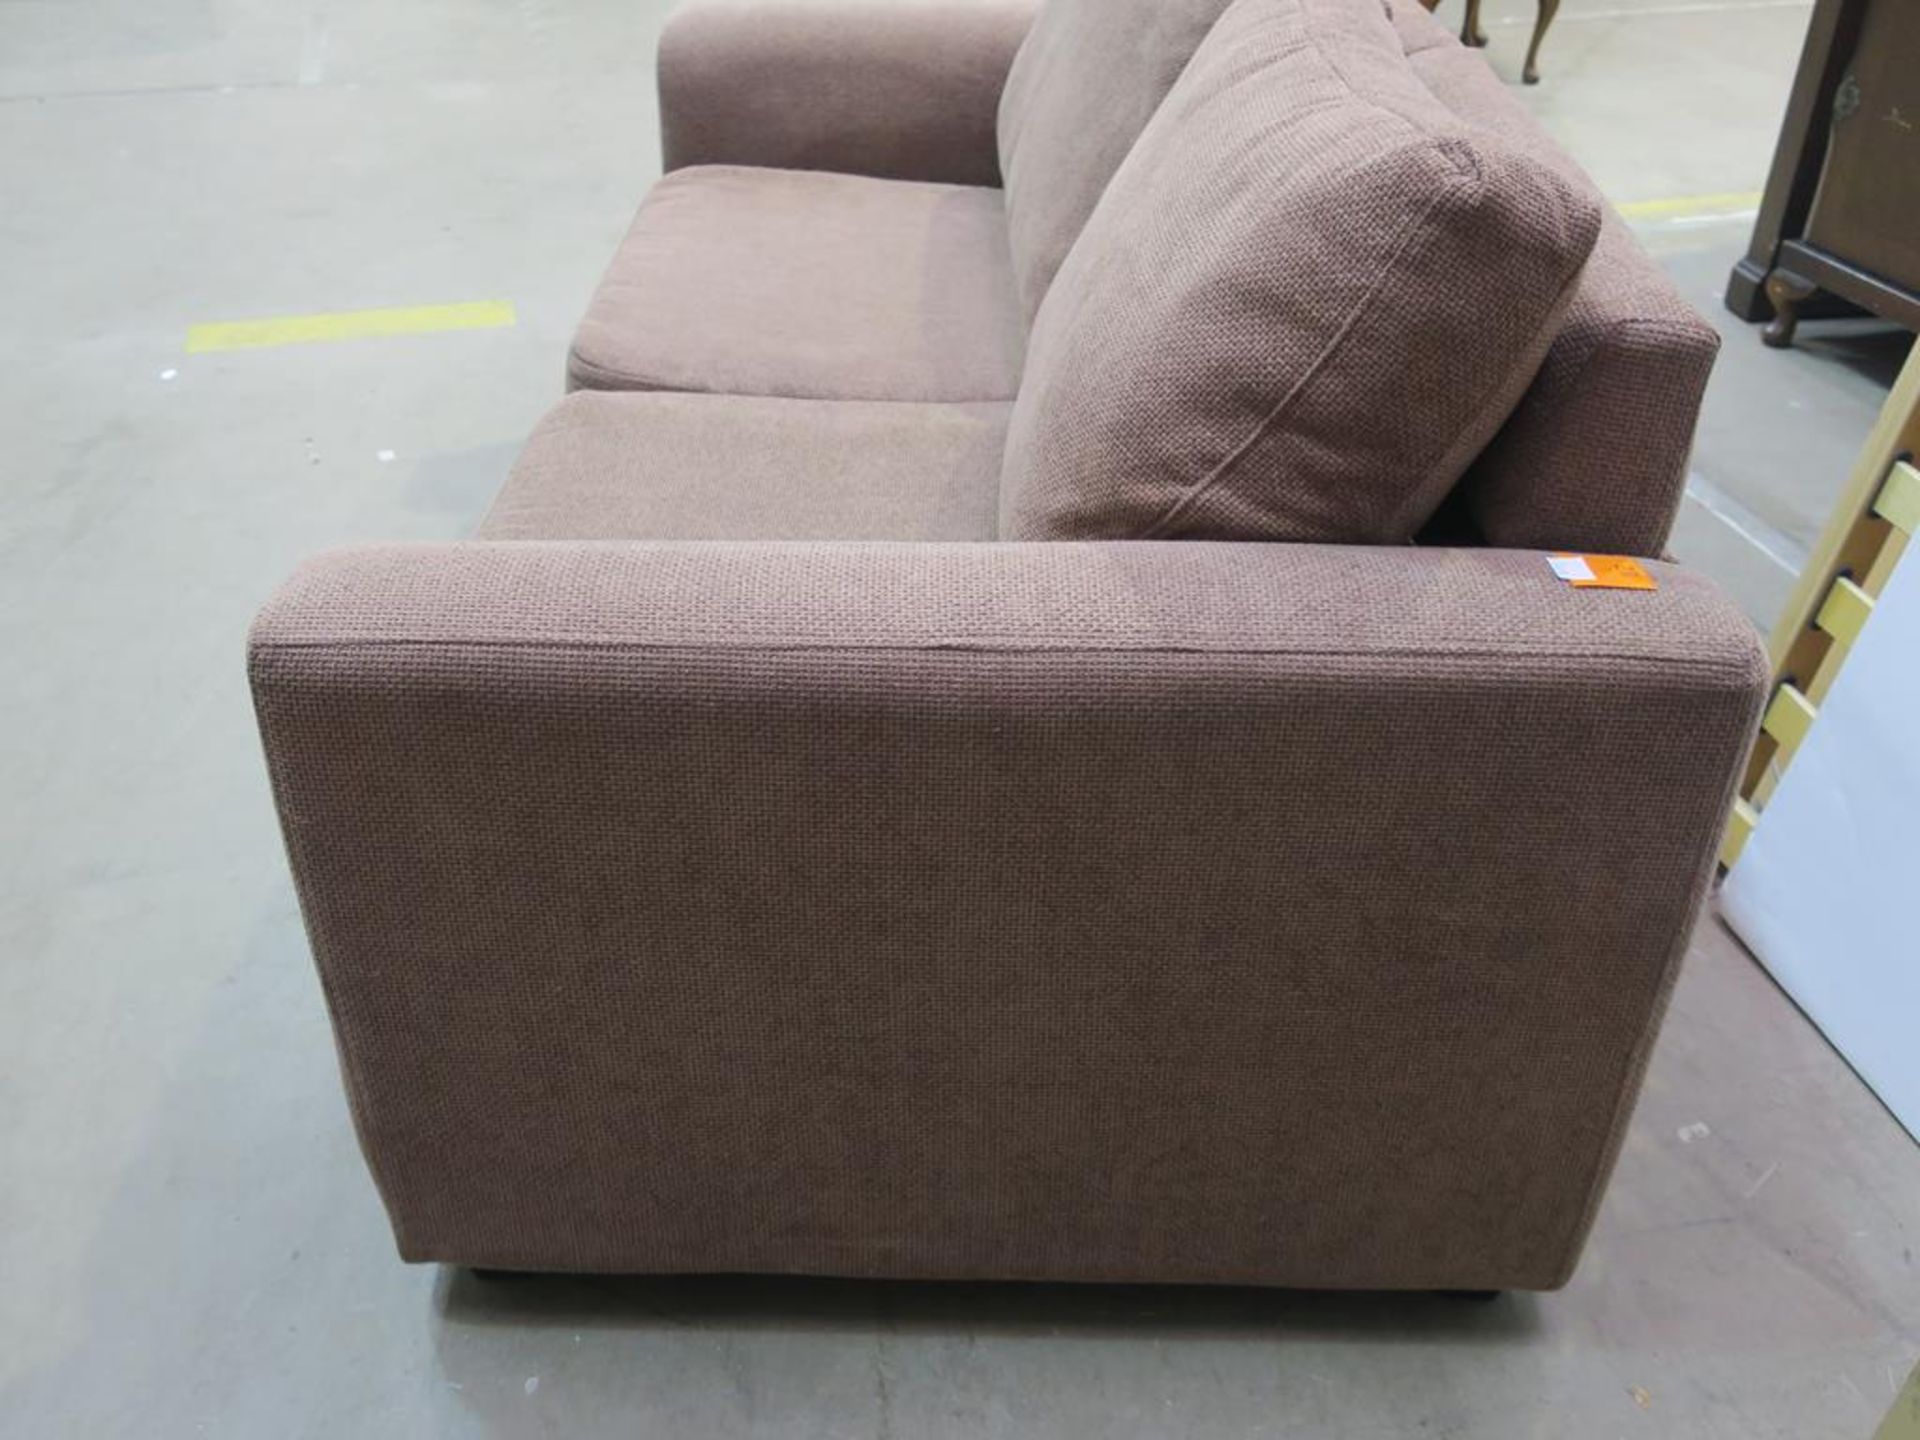 A two seater Bed Settee with a brown weave style upholstery (est £50-£100) - Image 10 of 10